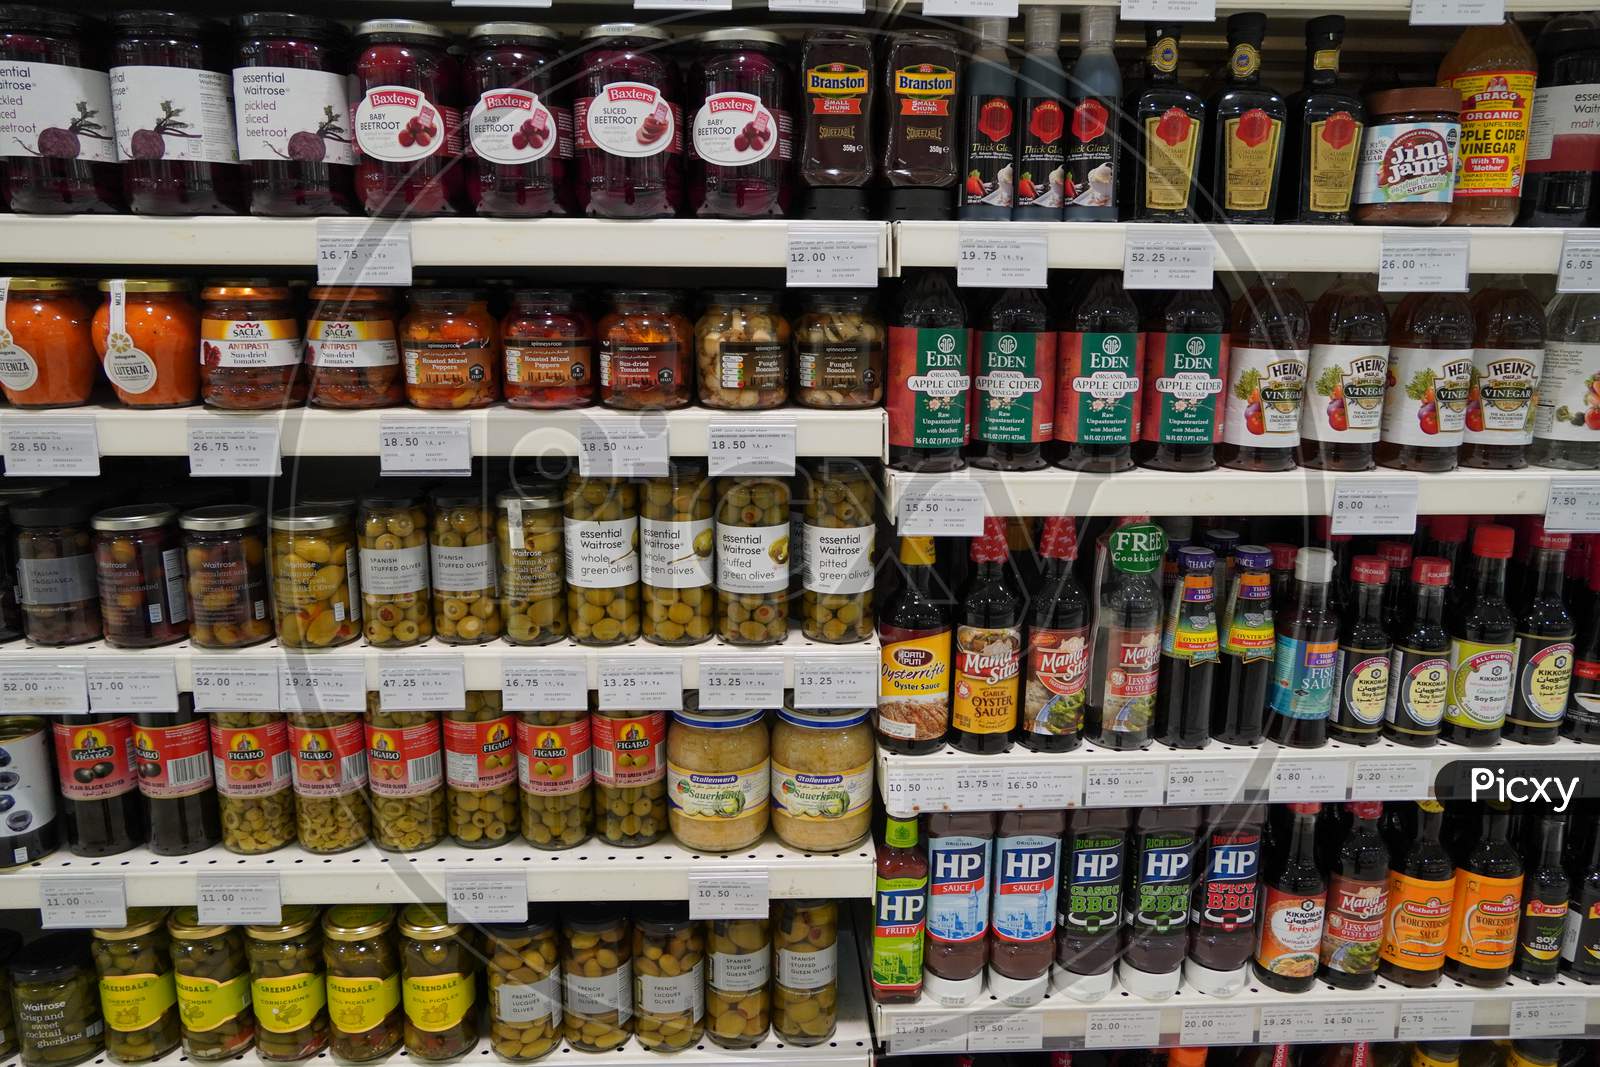 Dubai Uae December 2019 Traditional Turkish Pickles Of Various Fruits And Vegetables. Jars Of Salted Pickles On A Store Shelf. Beetroot, Olives, Cabbage, Cucumber, Onion, Tomato.